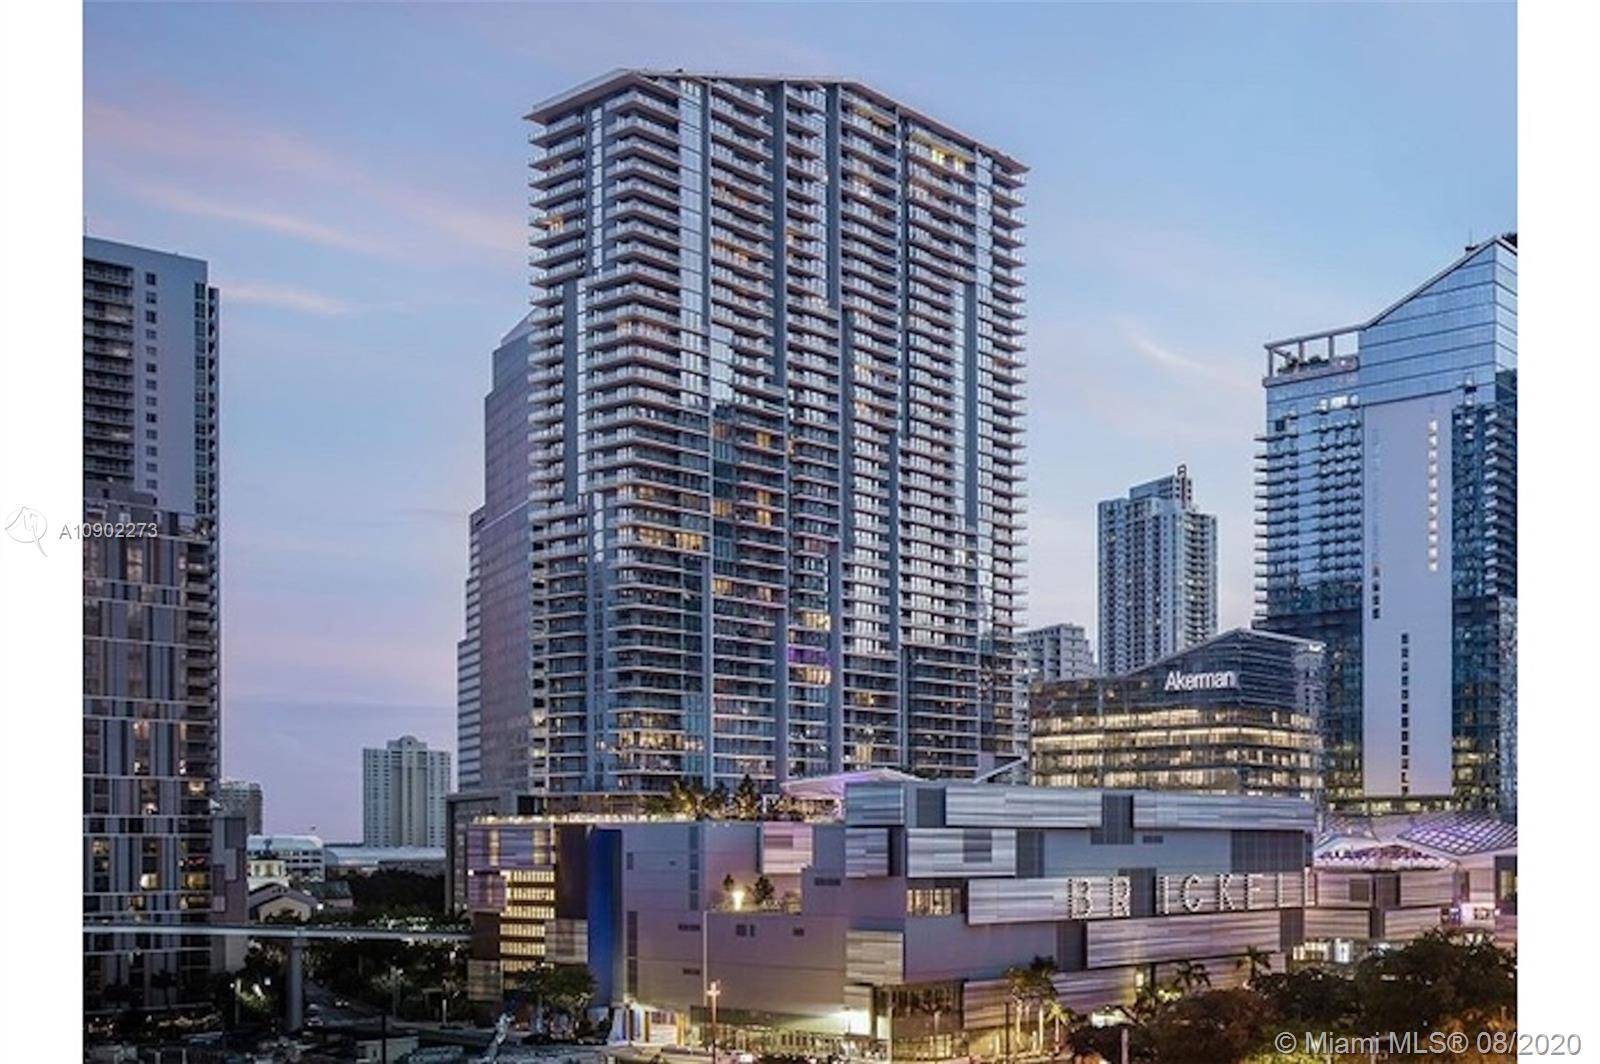 Miami Waterfront Views | Downtown Brickell City Centre